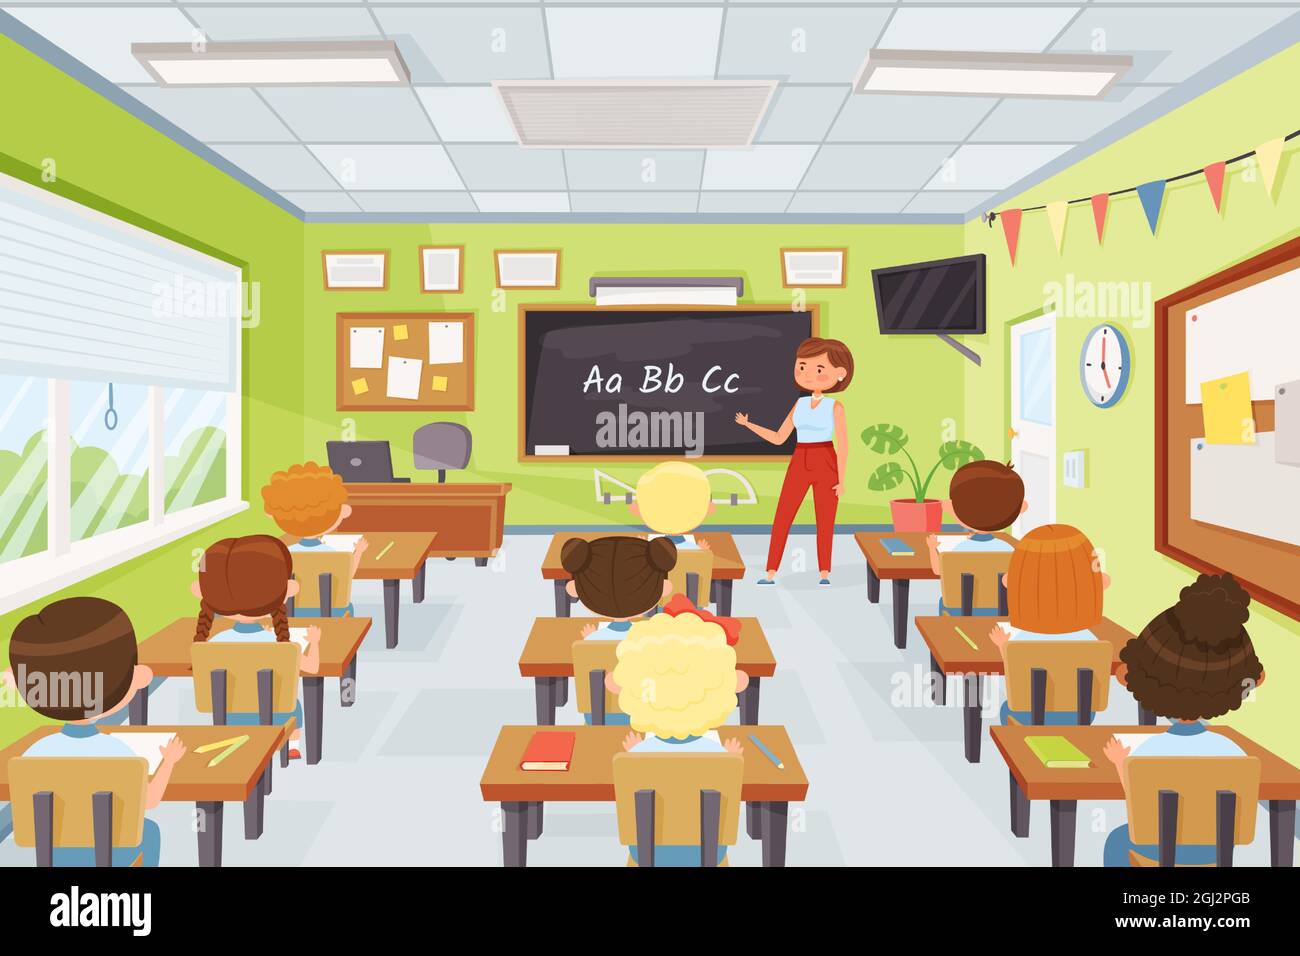 Cartoon kids and teacher in classroom, elementary school pupils studying. Young students listening to teacher at lesson vector illustration. Children sitting at desks and learning alphabet Stock Vector